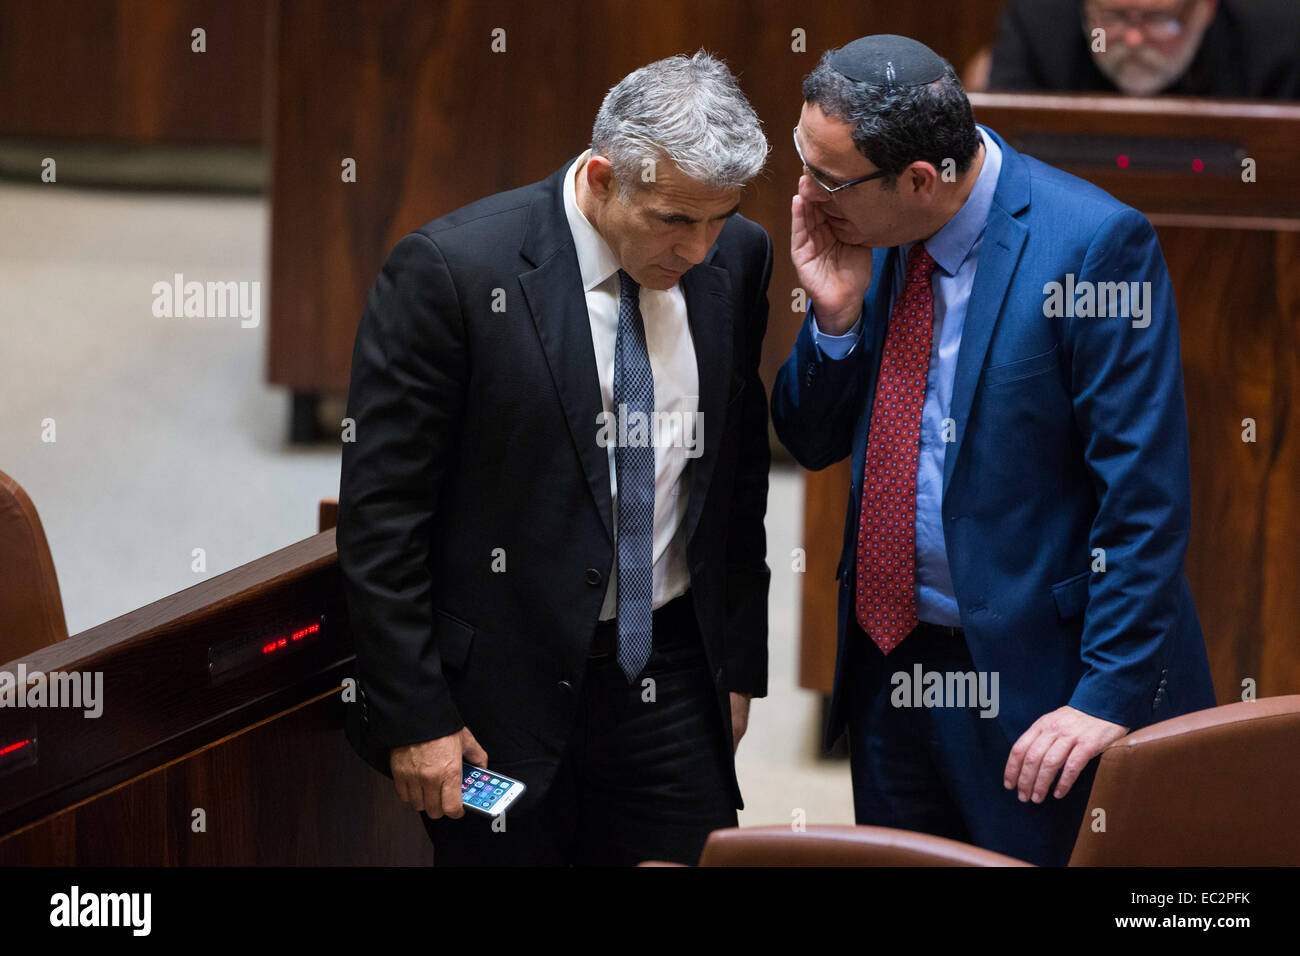 Jerusalem. 8th Dec, 2014. Former Israeli Finance Minister Yair Lapid (L) speaks with former Minister of Education Shay Piron during a vote on a bill to dissolve the Knesset (parliament) at the Knesset in Jerusalem, on Dec. 8, 2014. Israeli politicians voted in favor of dissolving the Knesset (parliament) on Monday night, and Israelis are expected to head to the polls next March. After two rounds of voting late on Monday, along with an initial vote on Wednesday, 93 members (out of 120) voted for early elections. © JINI/Xinhua/Alamy Live News Stock Photo